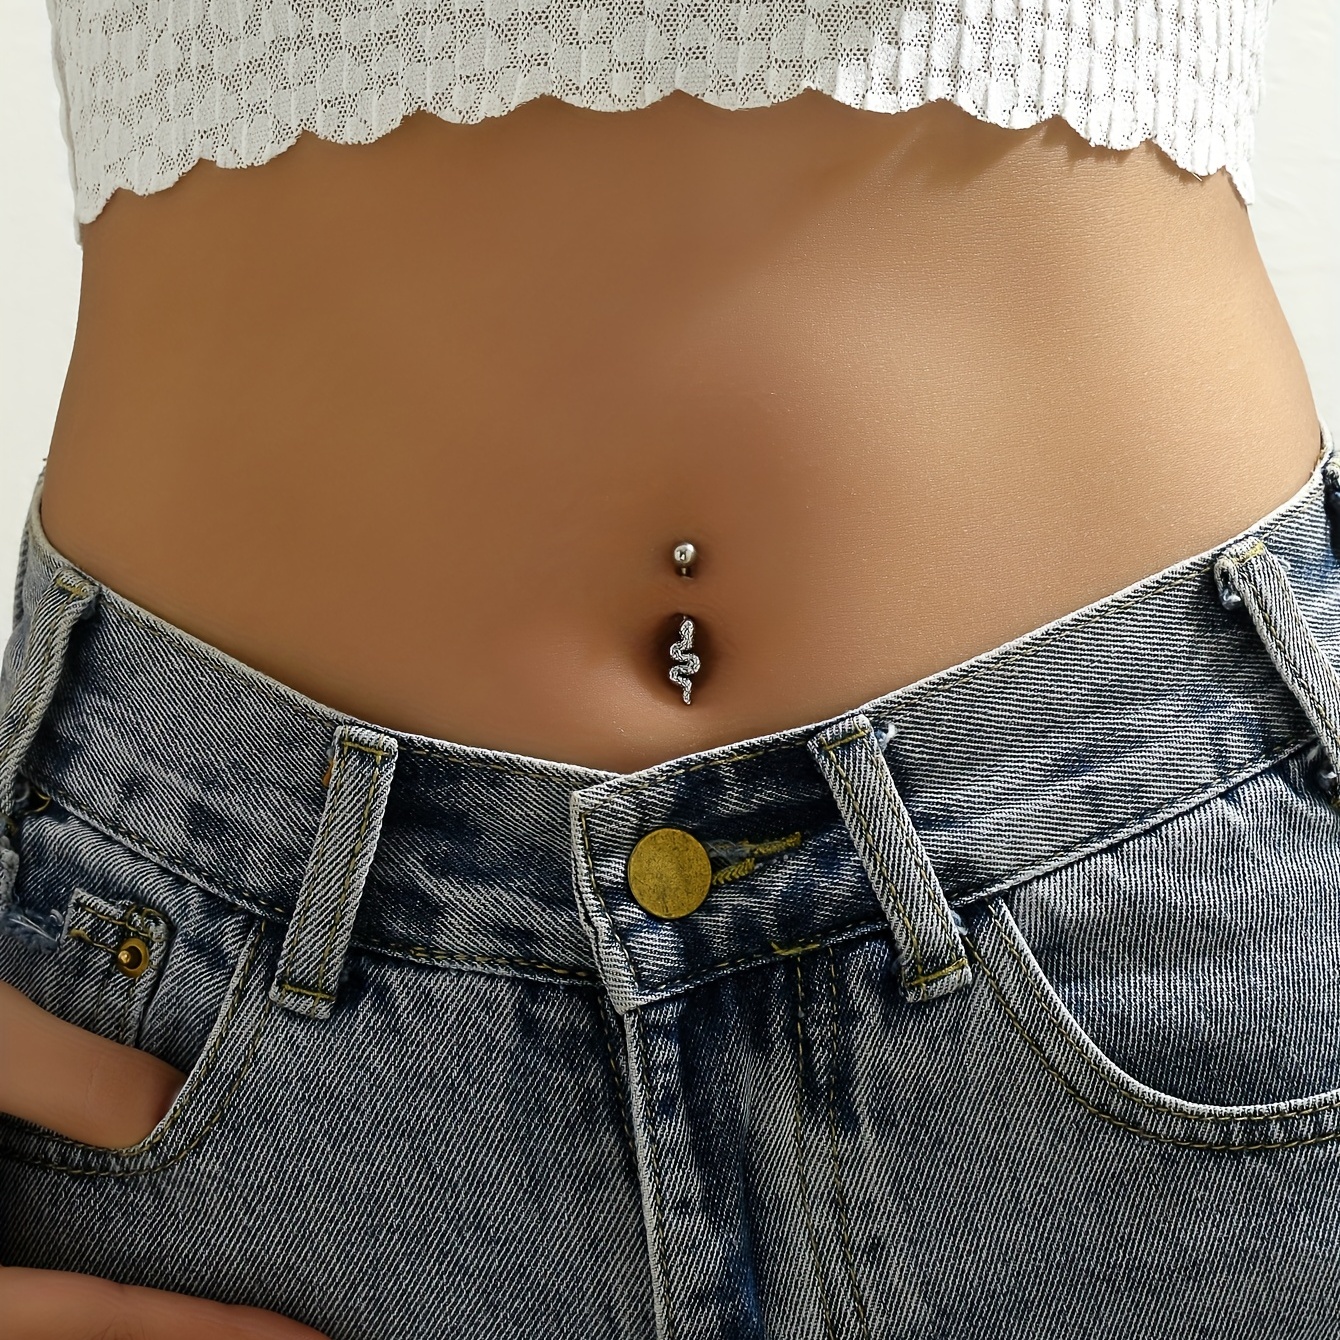 Minimalist Belly Ring Belly Button Ring Belly Button Jewelry 